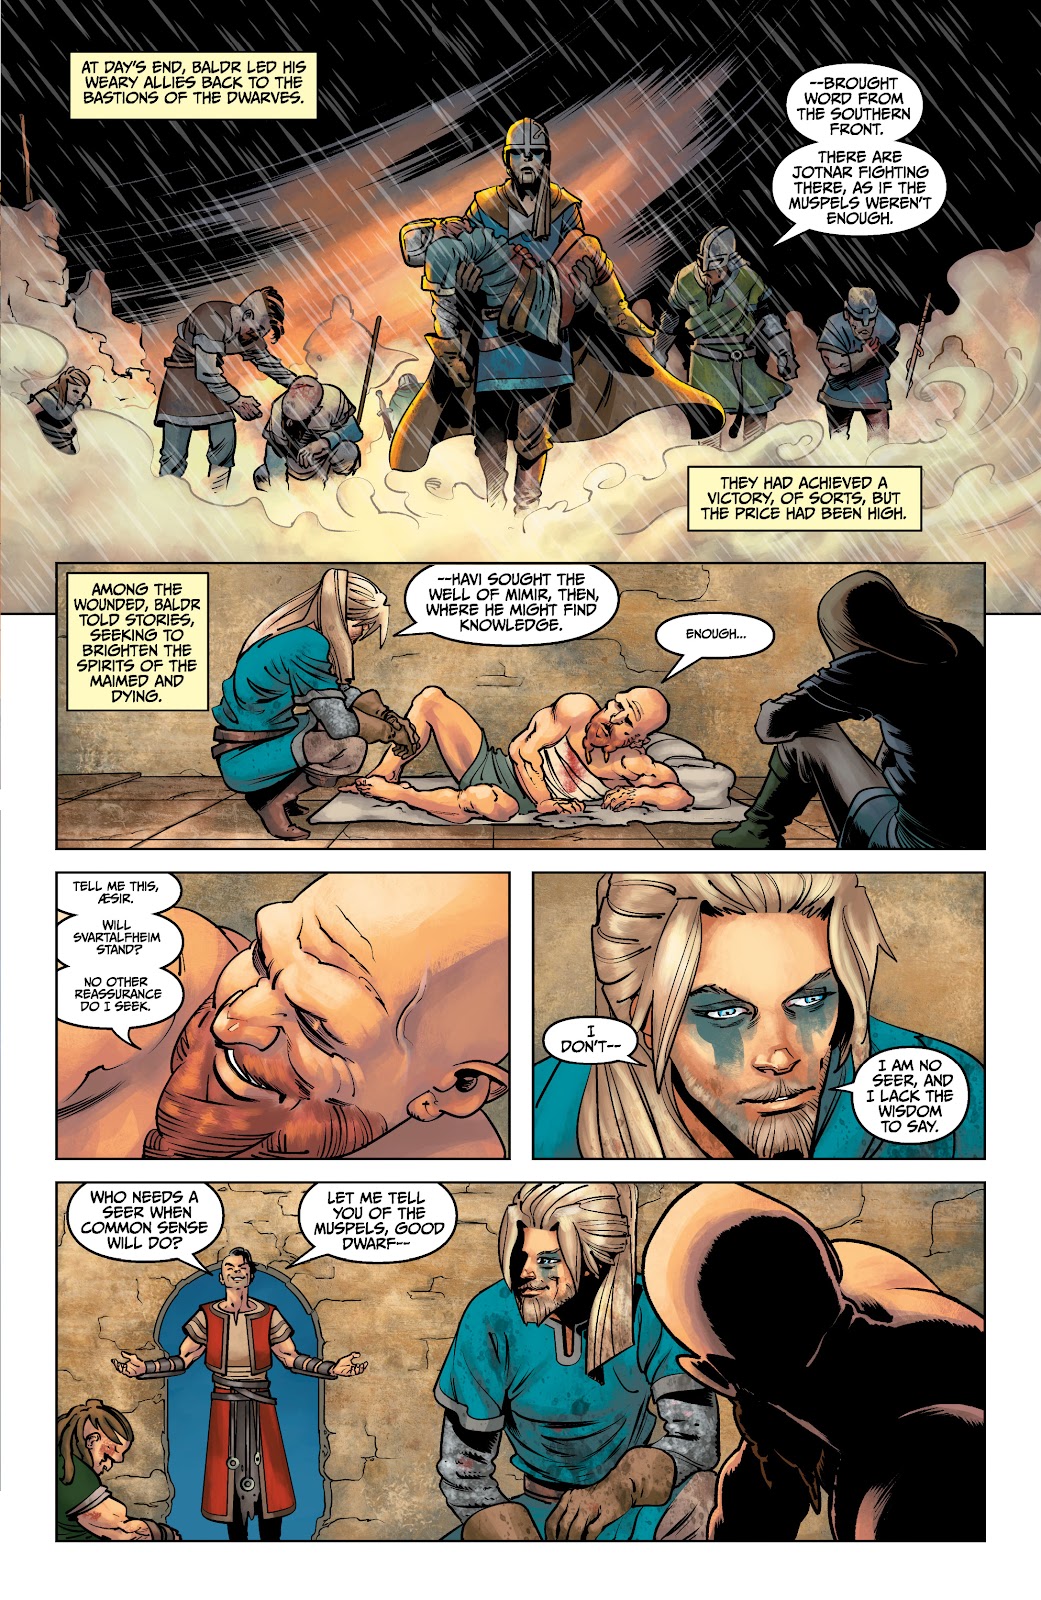 Assassin's Creed Valhalla: Forgotten Myths issue 3 - Page 5